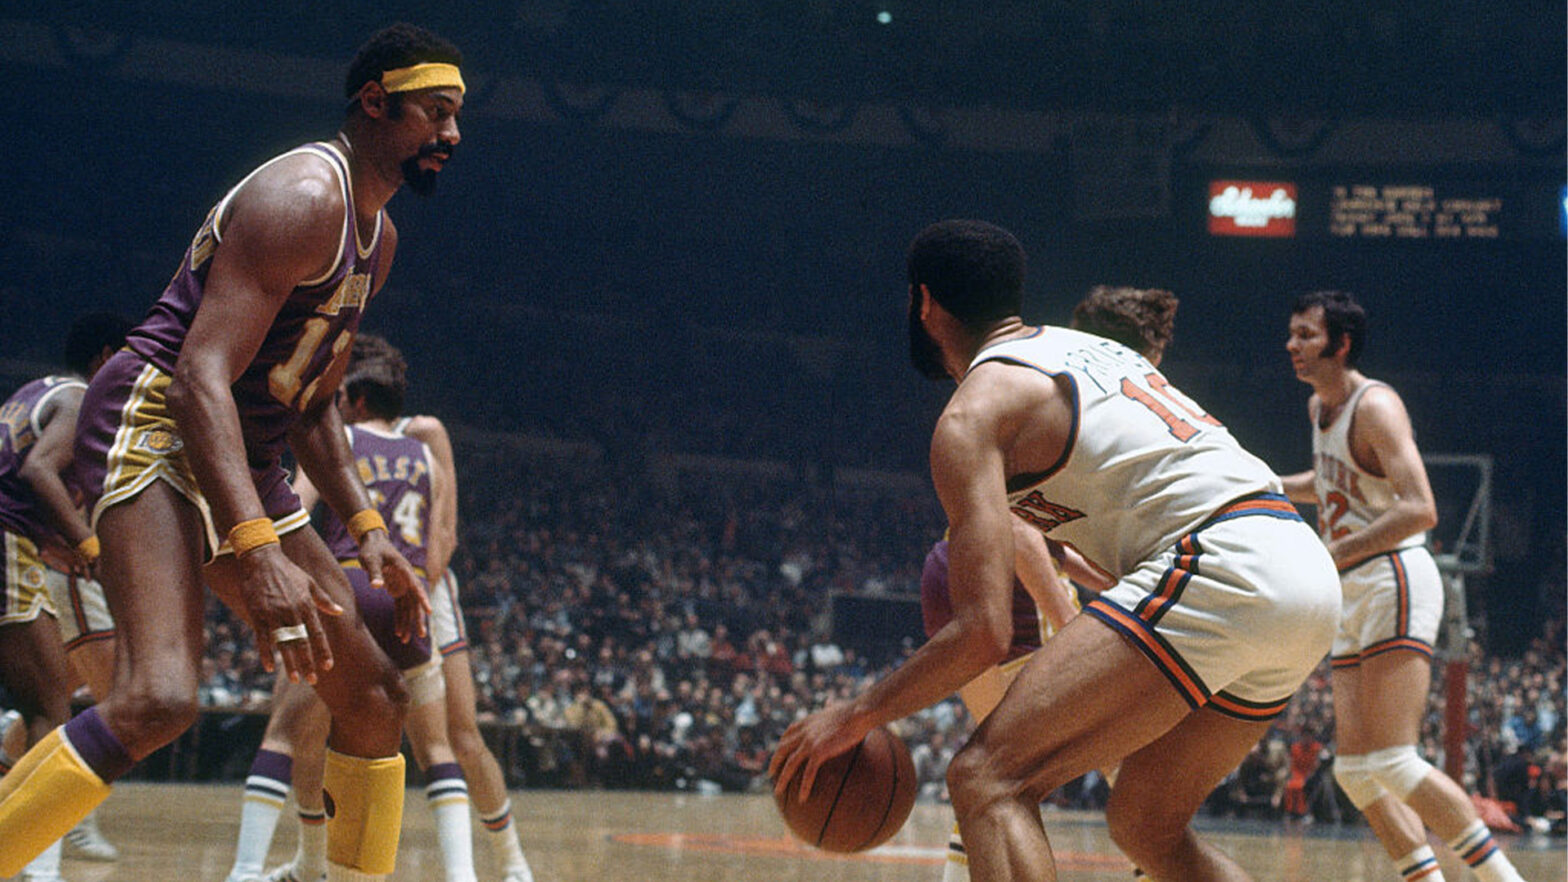 Wilt Chamberlain's 1972 NBA Finals Jersey Sells For $4.9M, Becoming Third-Most Valuable NBA Jersey Ever Sold Publicly